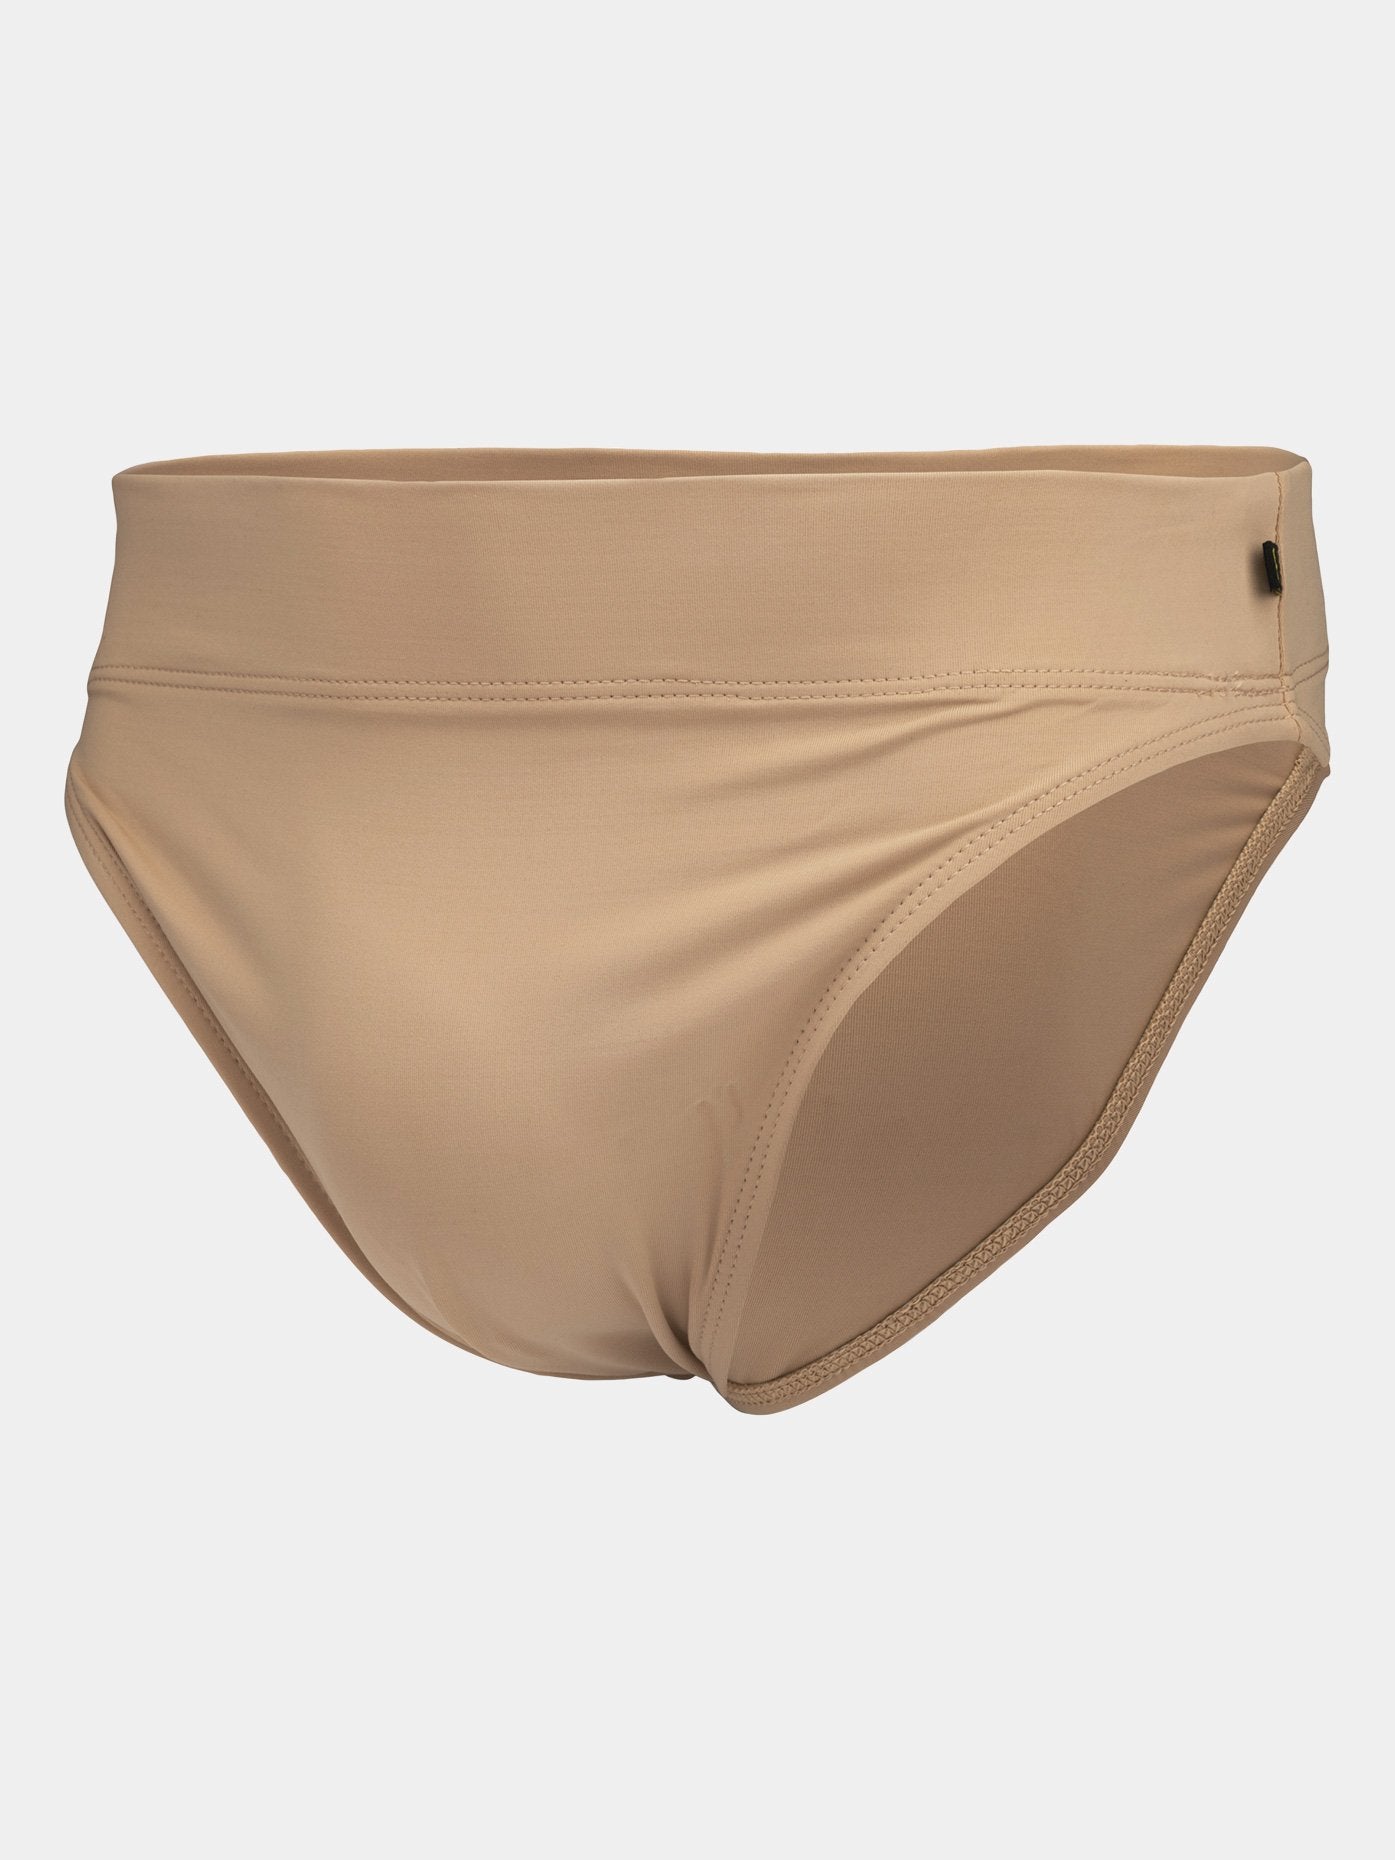 Mens 'Lucas' Dance Belt: Secure and comfortable support for male dancers